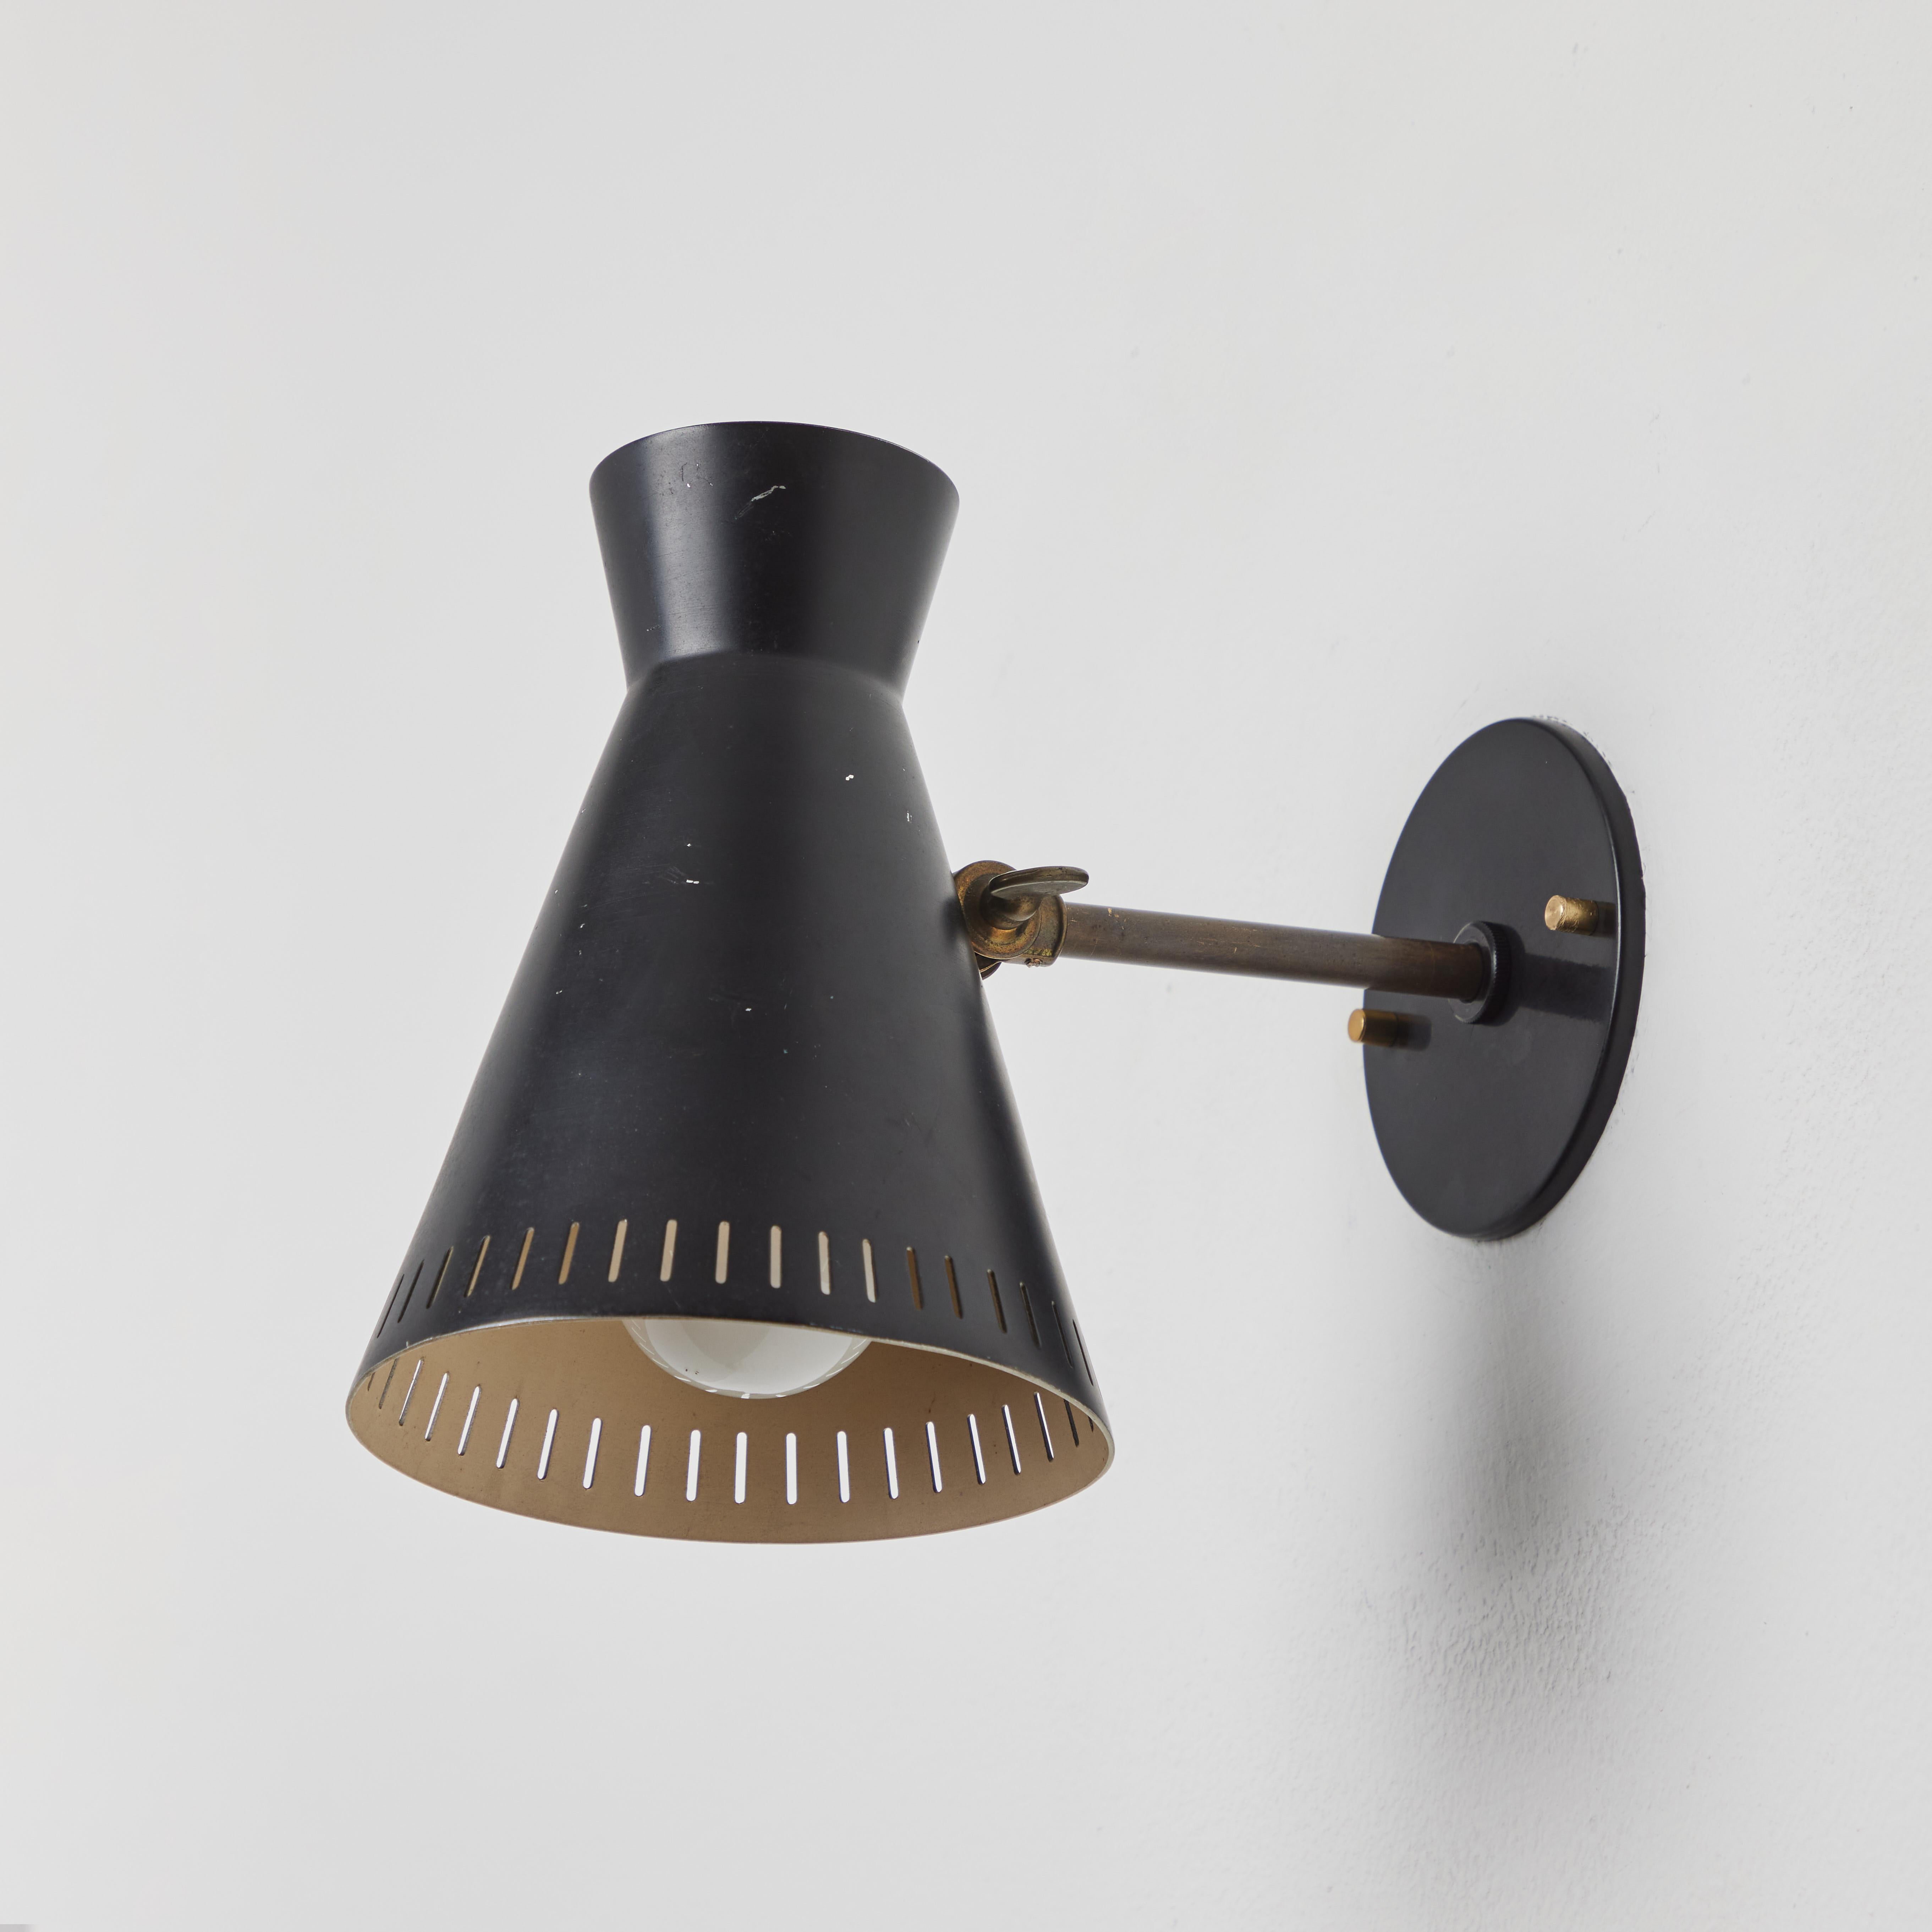 1950s Perforated Black Metal Diabolo Wall Lamp Attributed to Mauri Almari For Sale 6